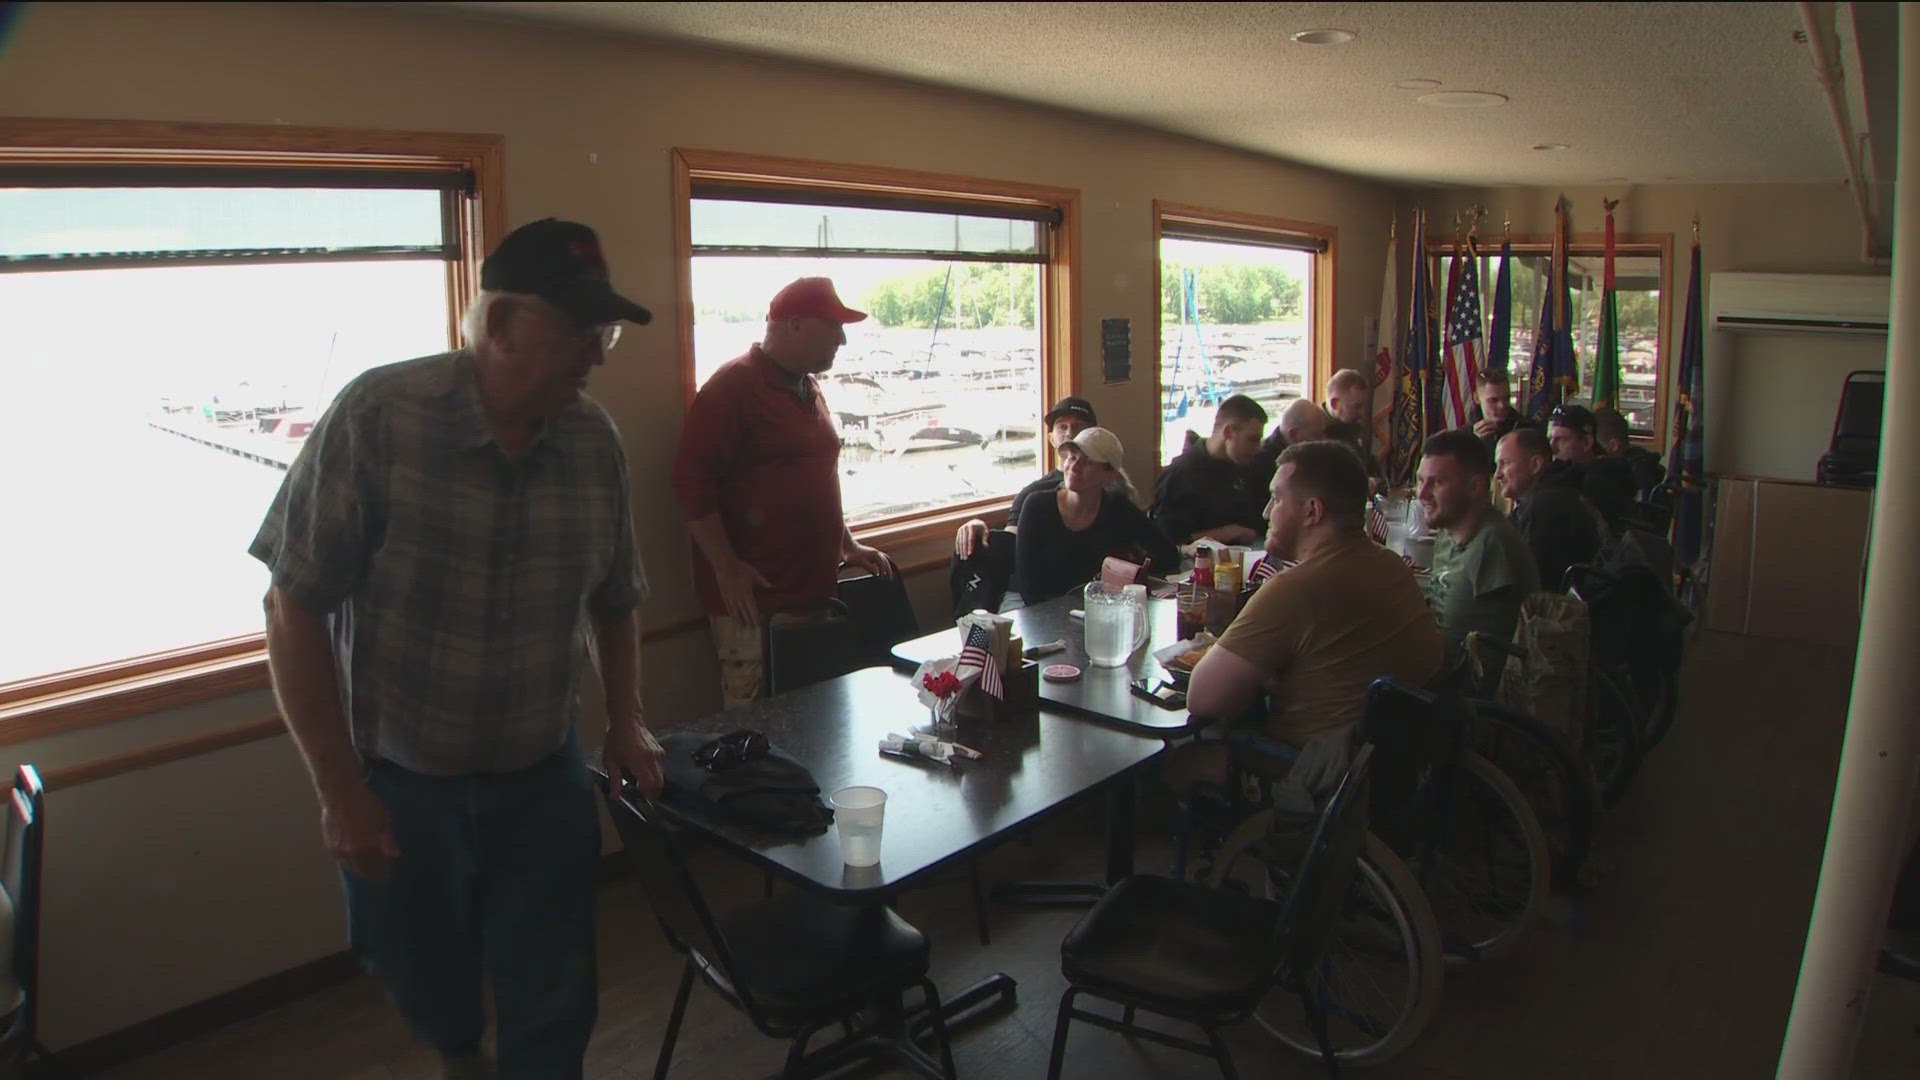 After a ride around White Bear Lake, the VFW picks up the tab for lunch.